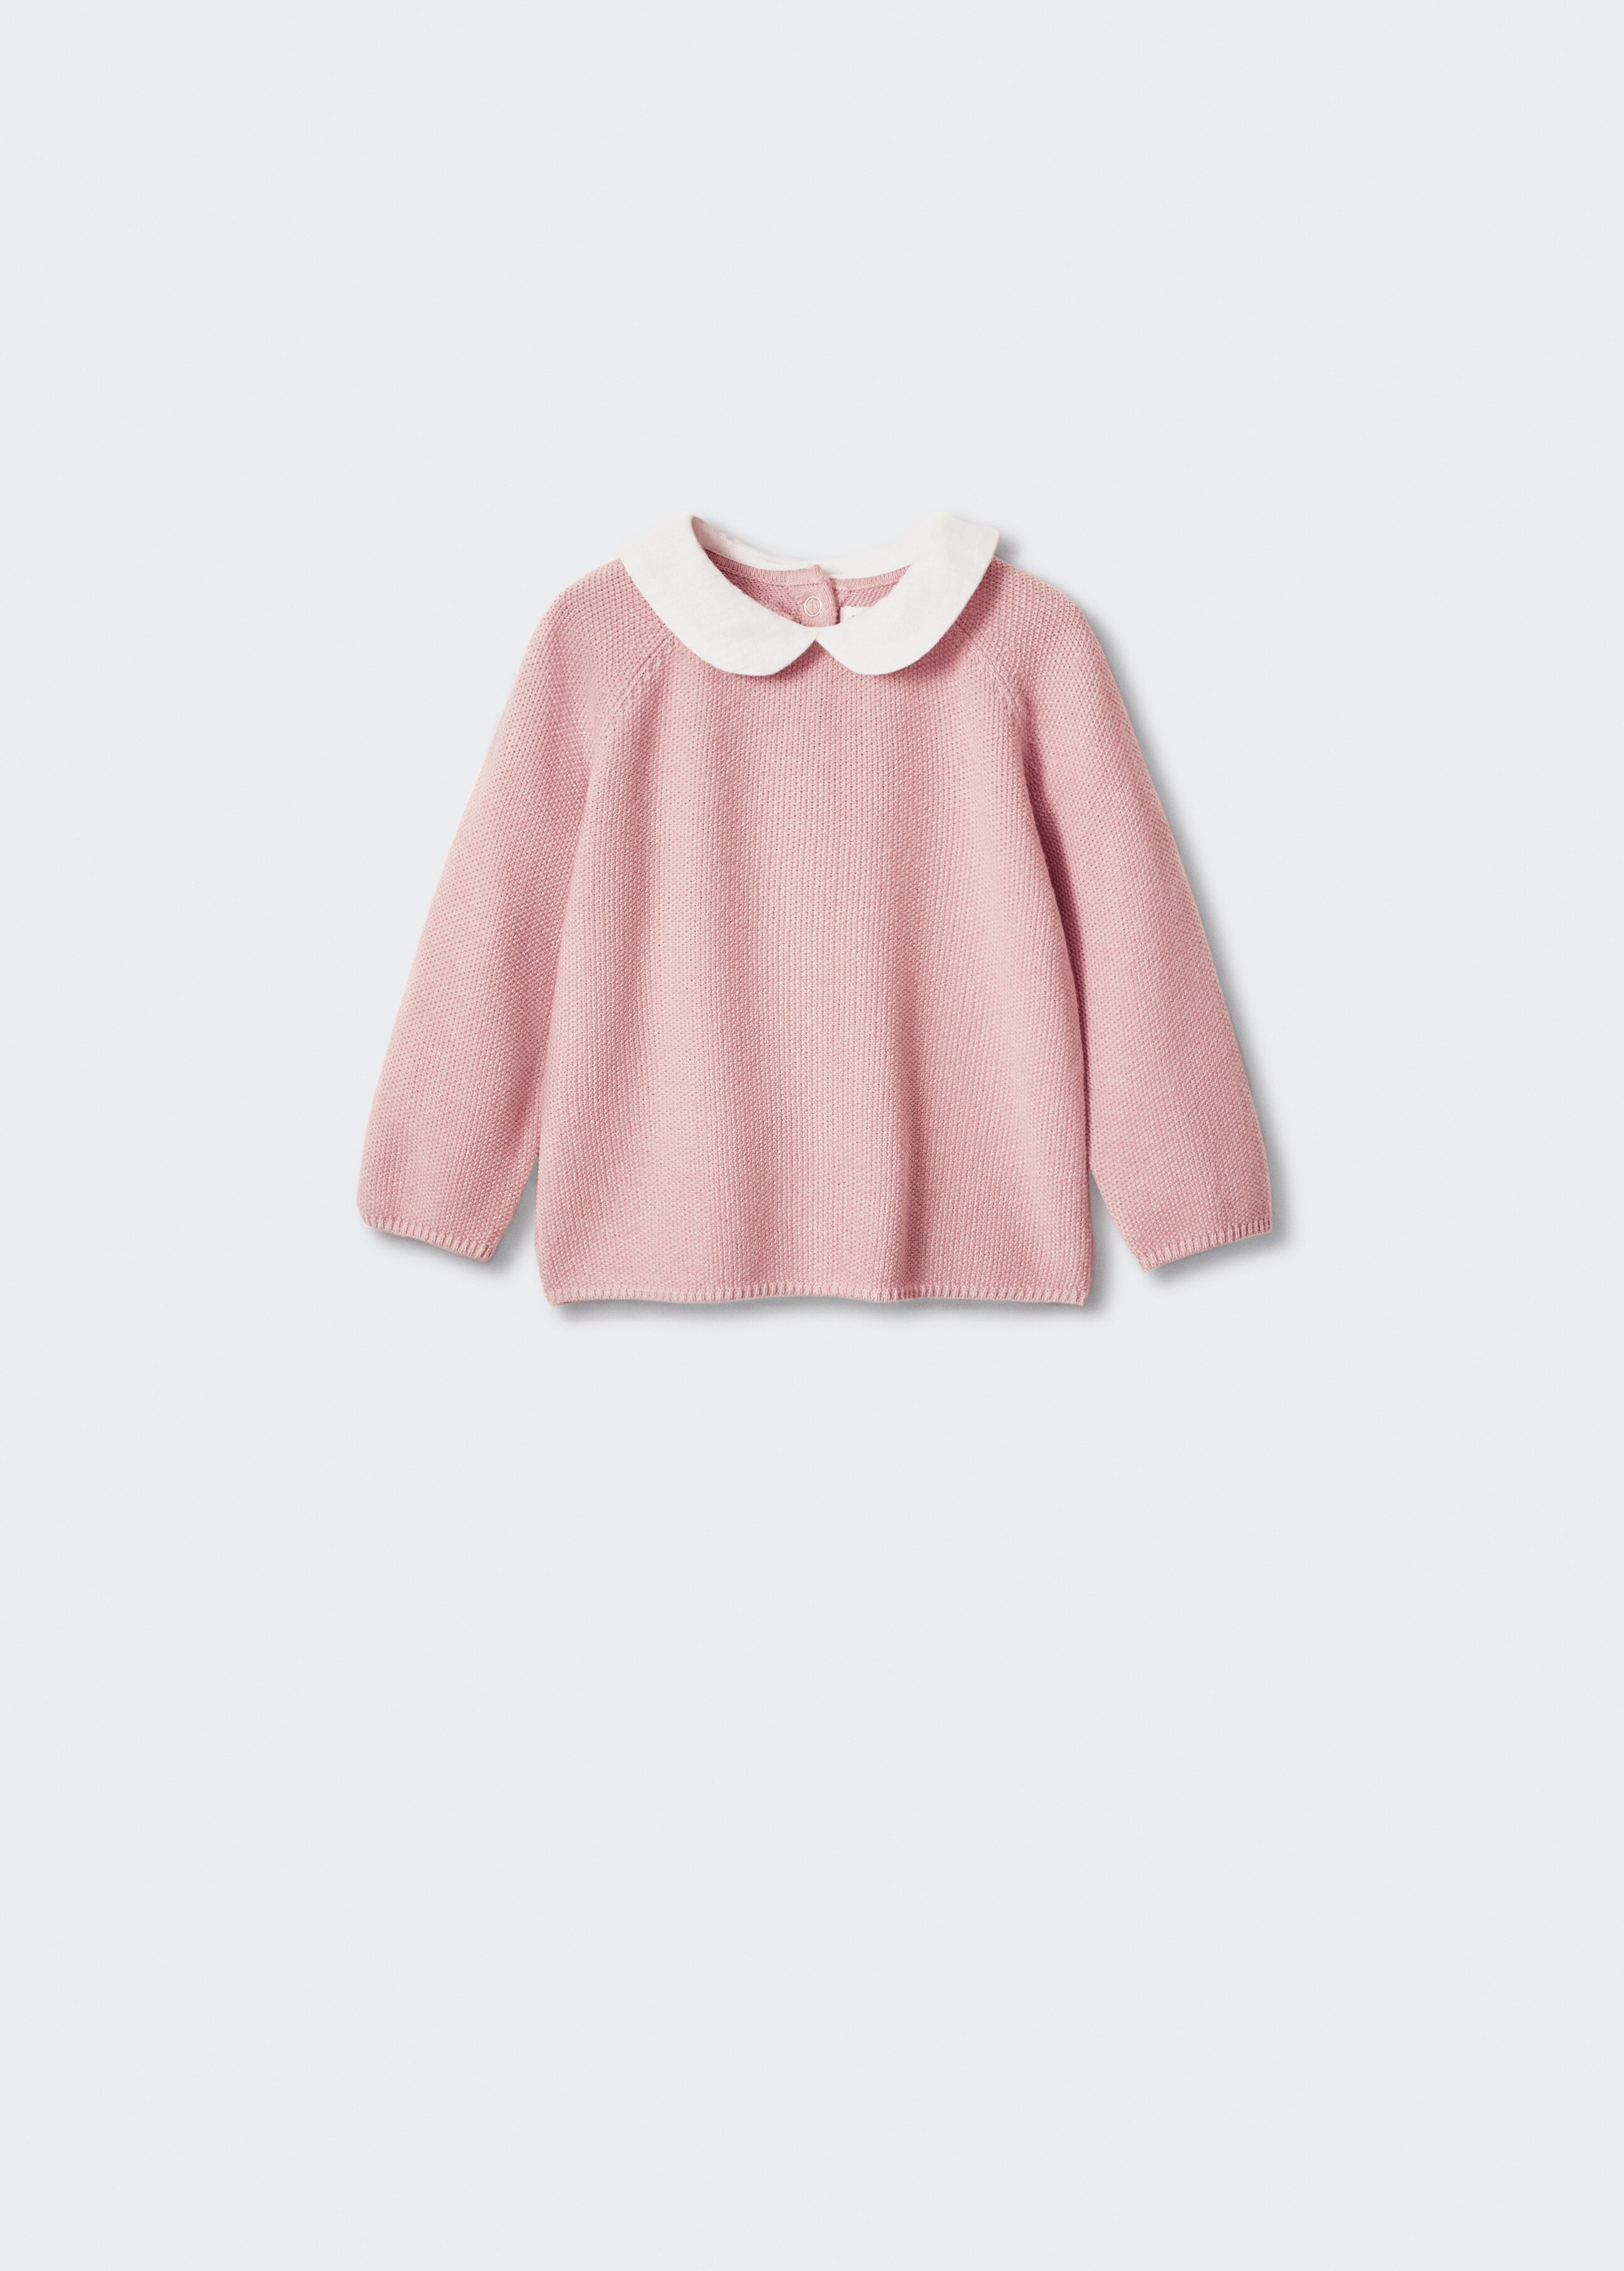 Baby doll-neck sweater - Article without model